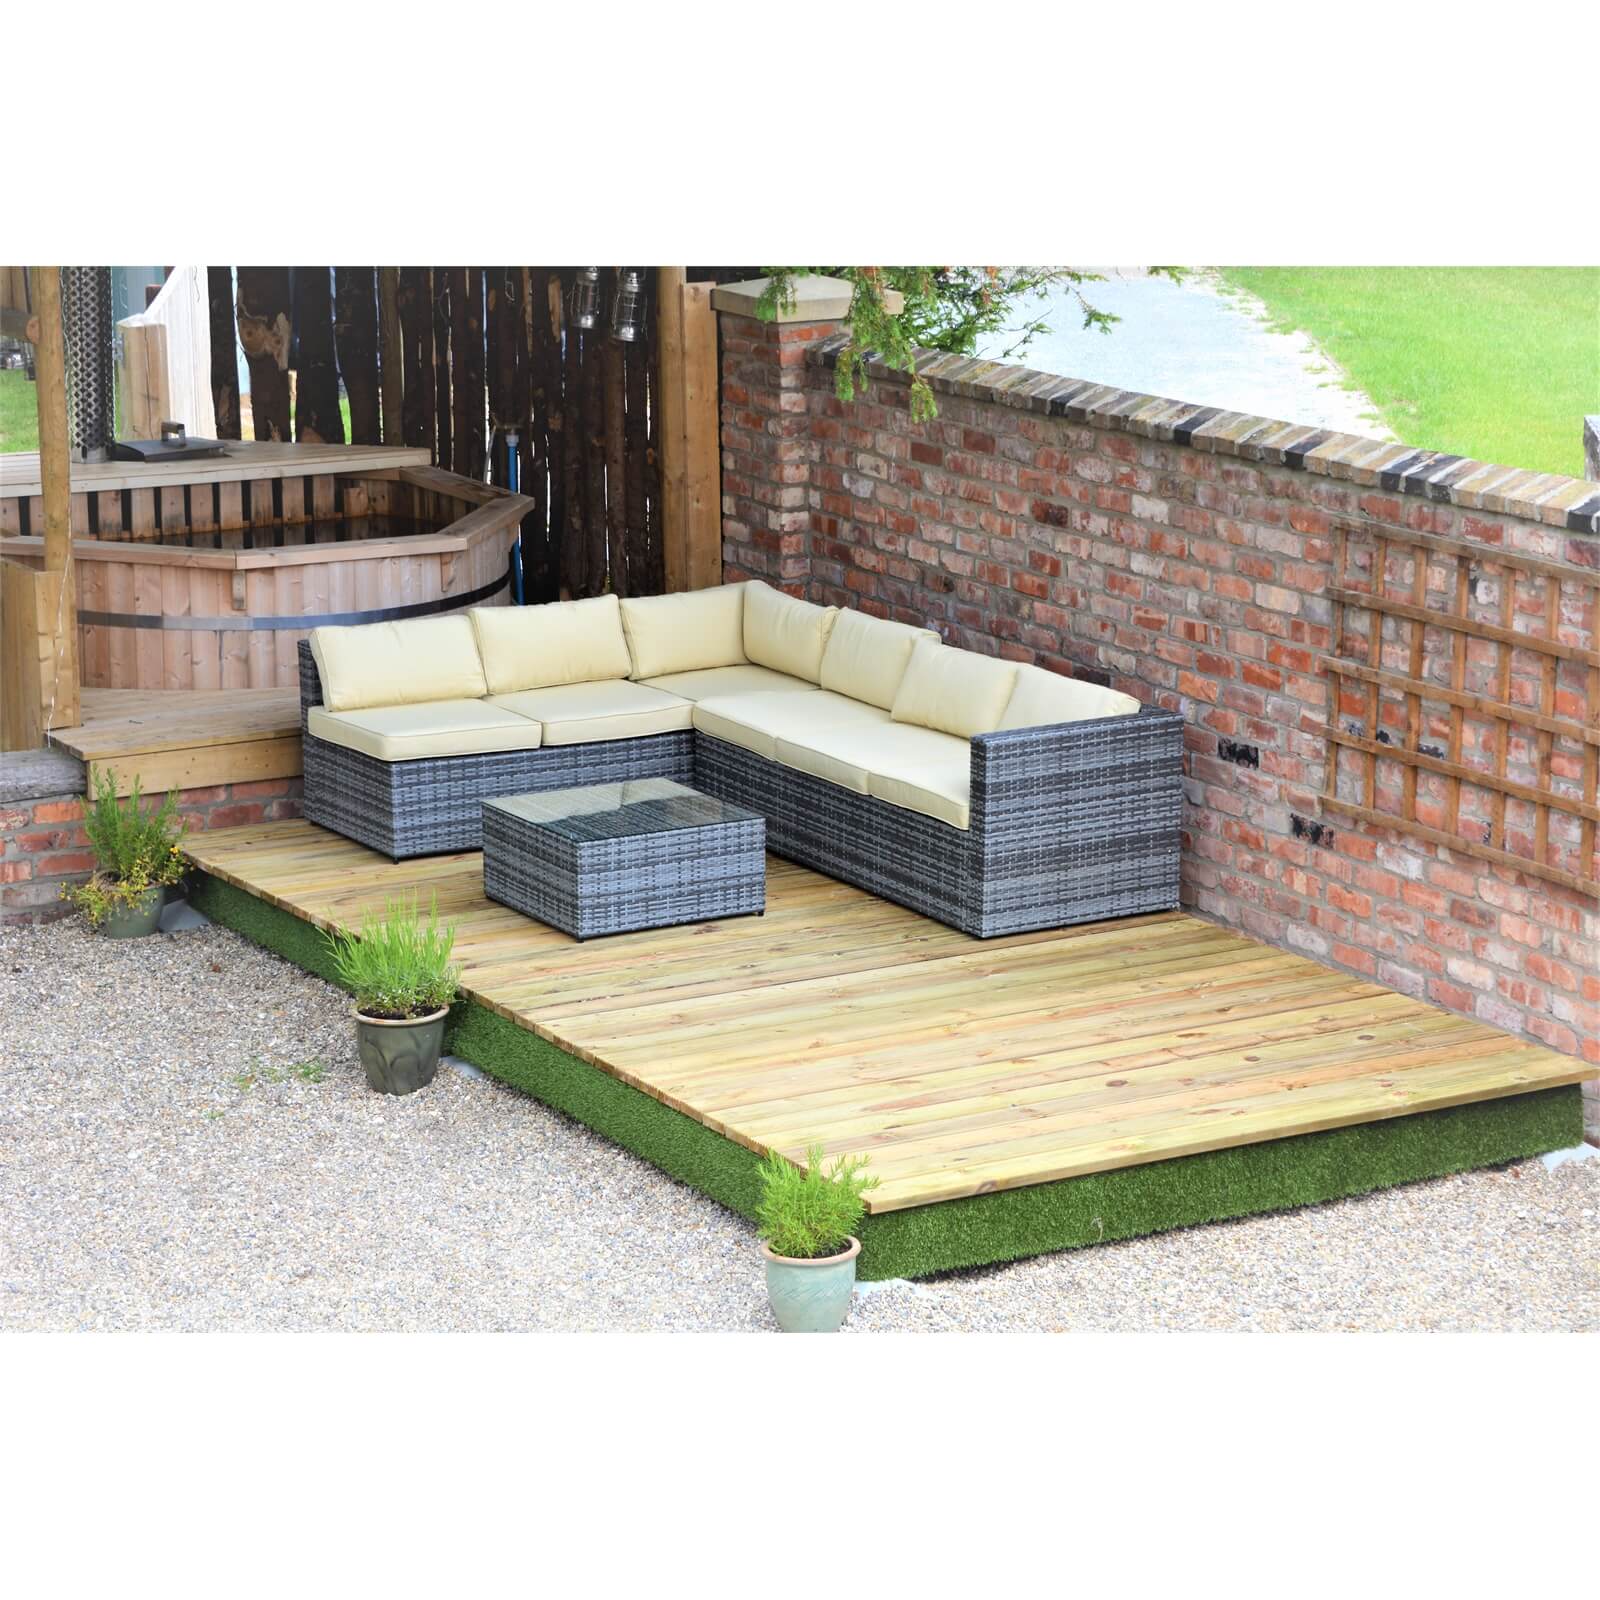 Photo of Swift Deck Complete Decking Kit - 2.4 X 4.7m